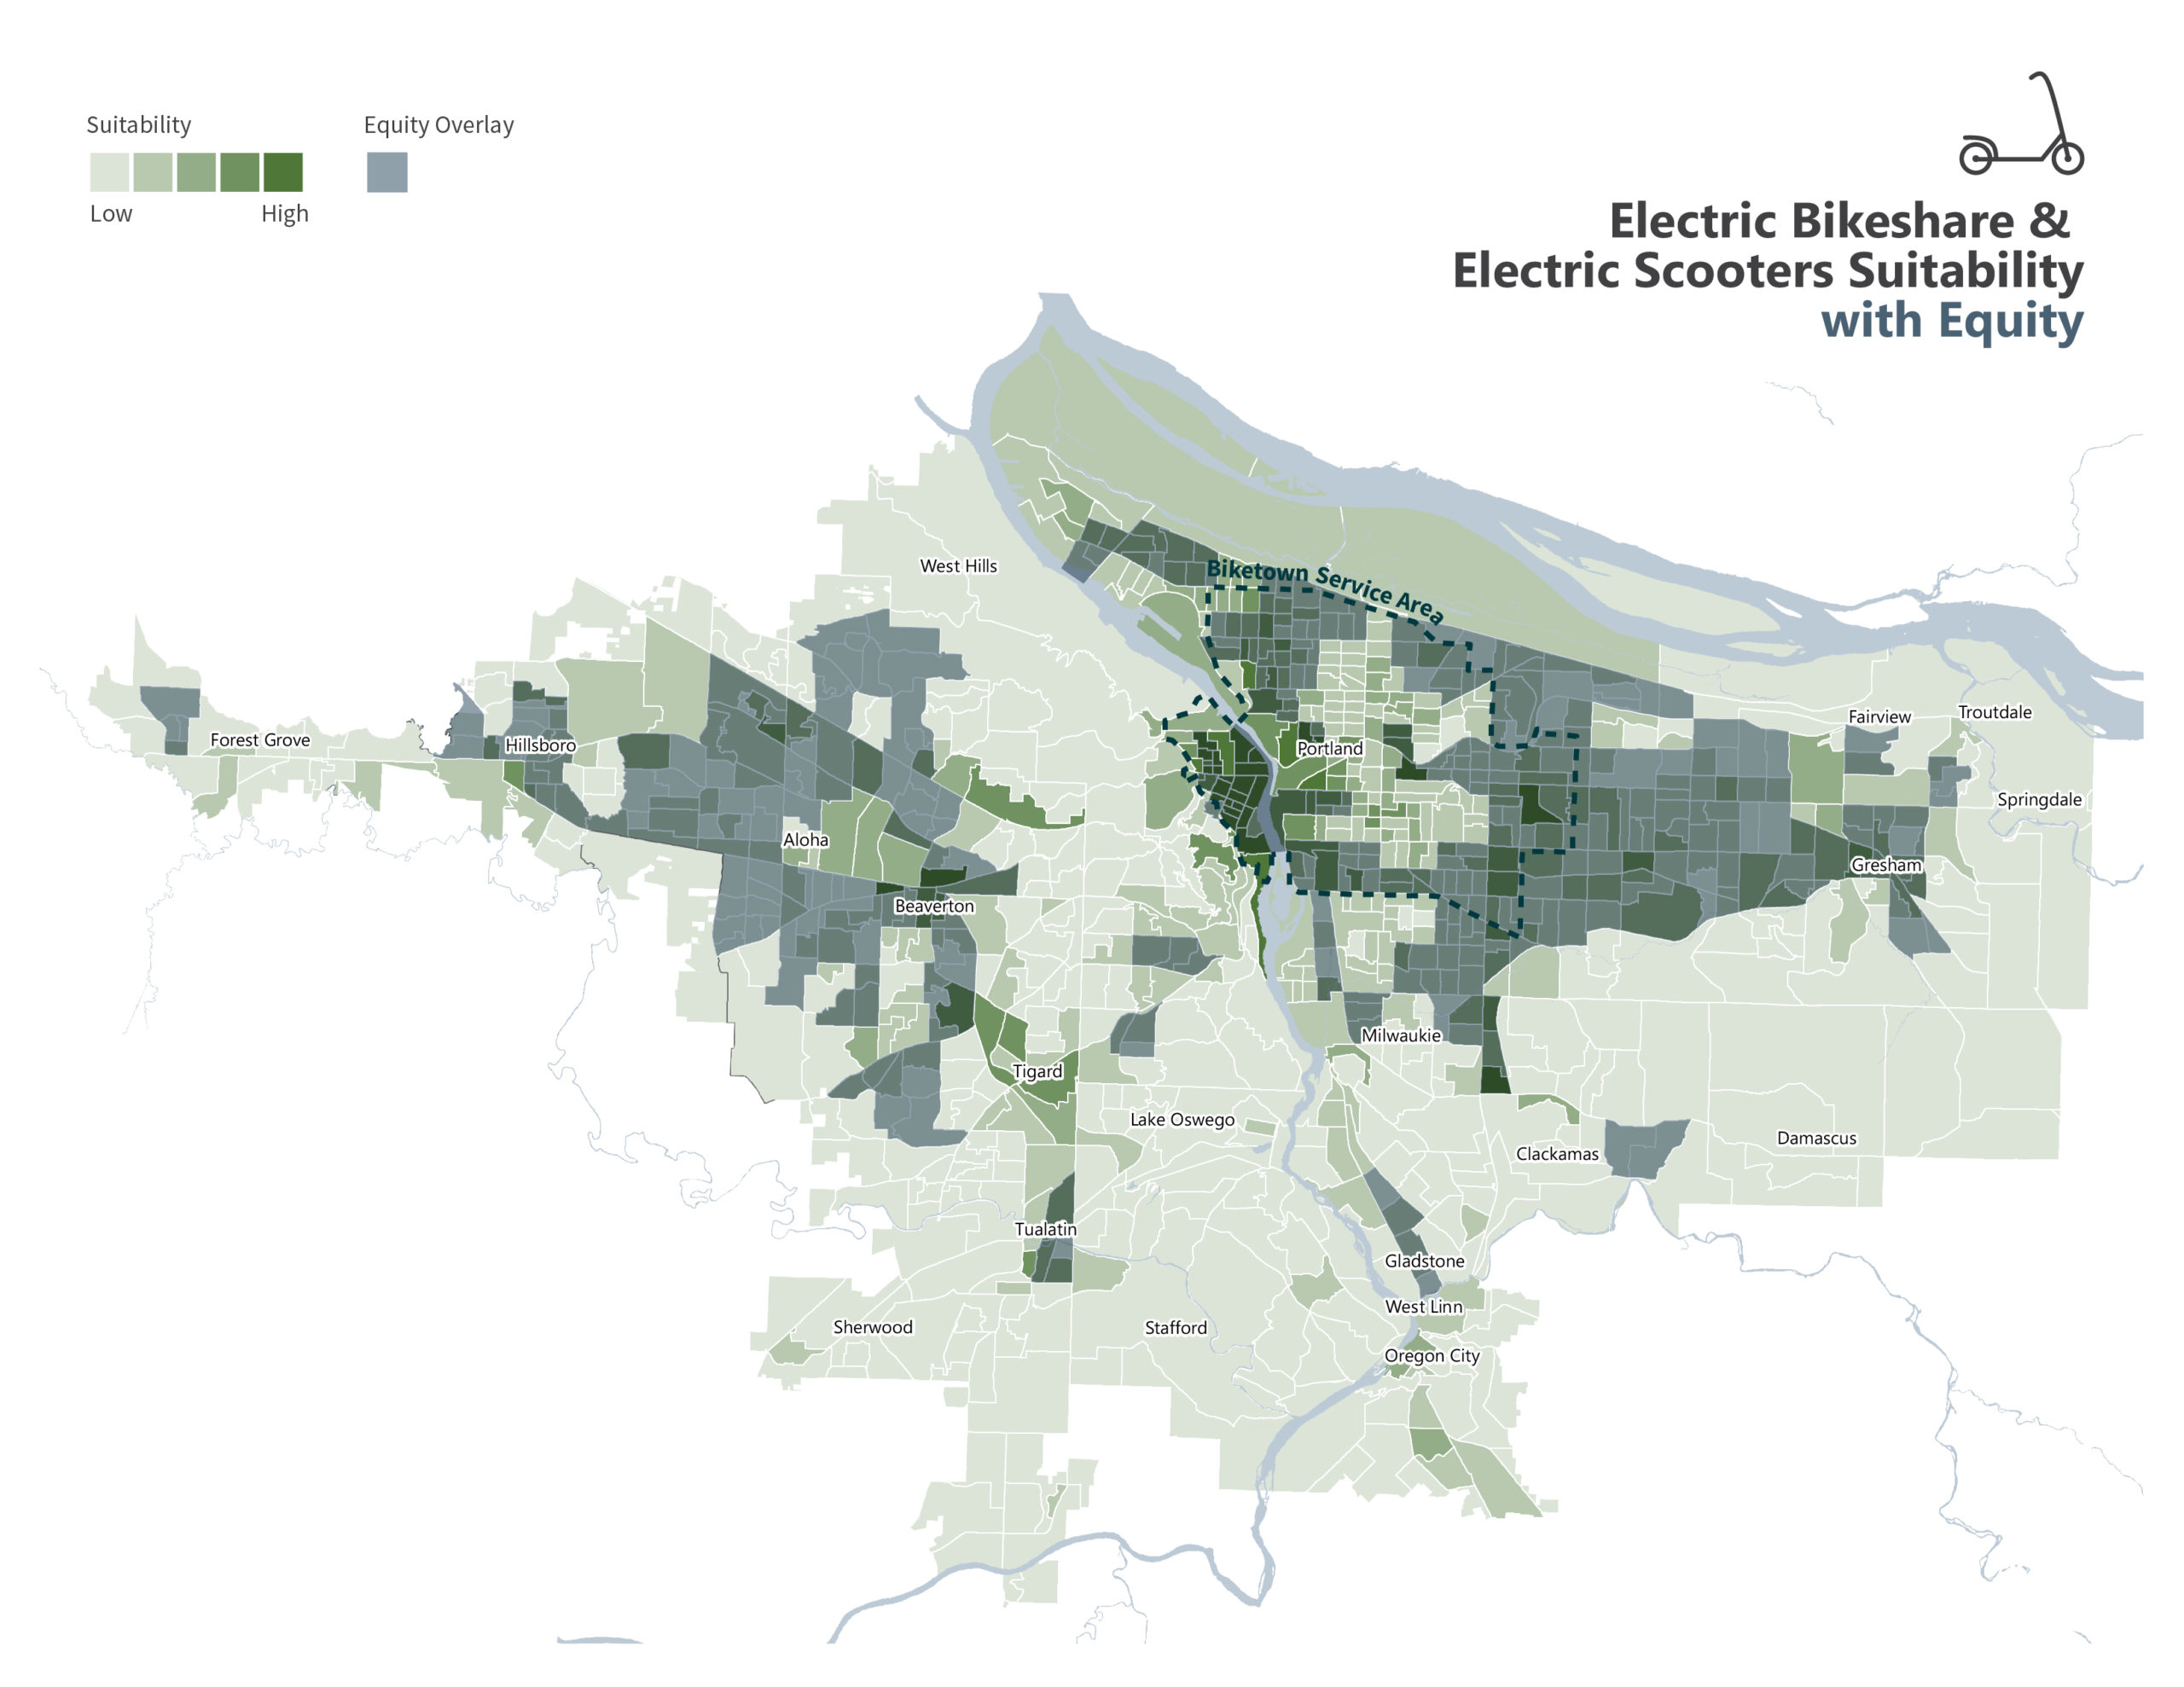 Electric Bikeshare & Electric Scooters Suitability with Equity Map